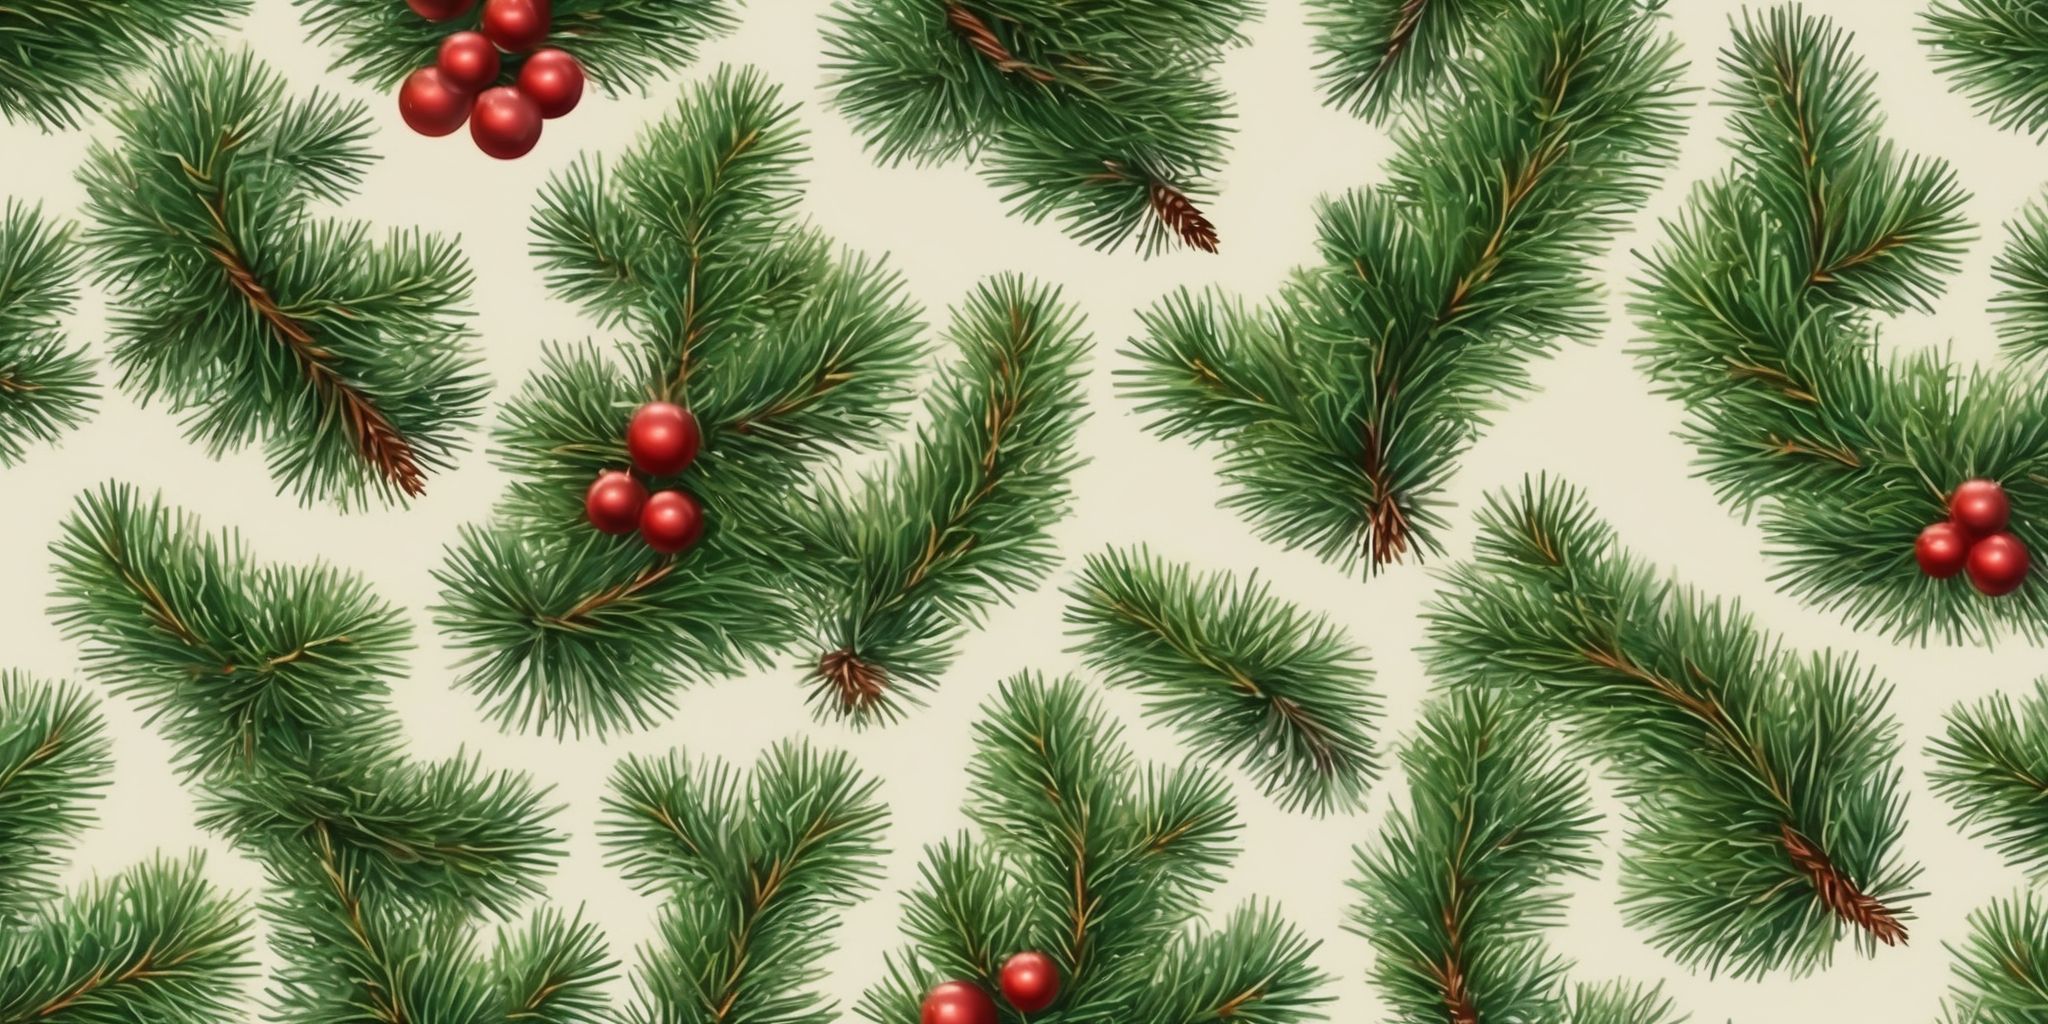 Fir tree in realistic Christmas style